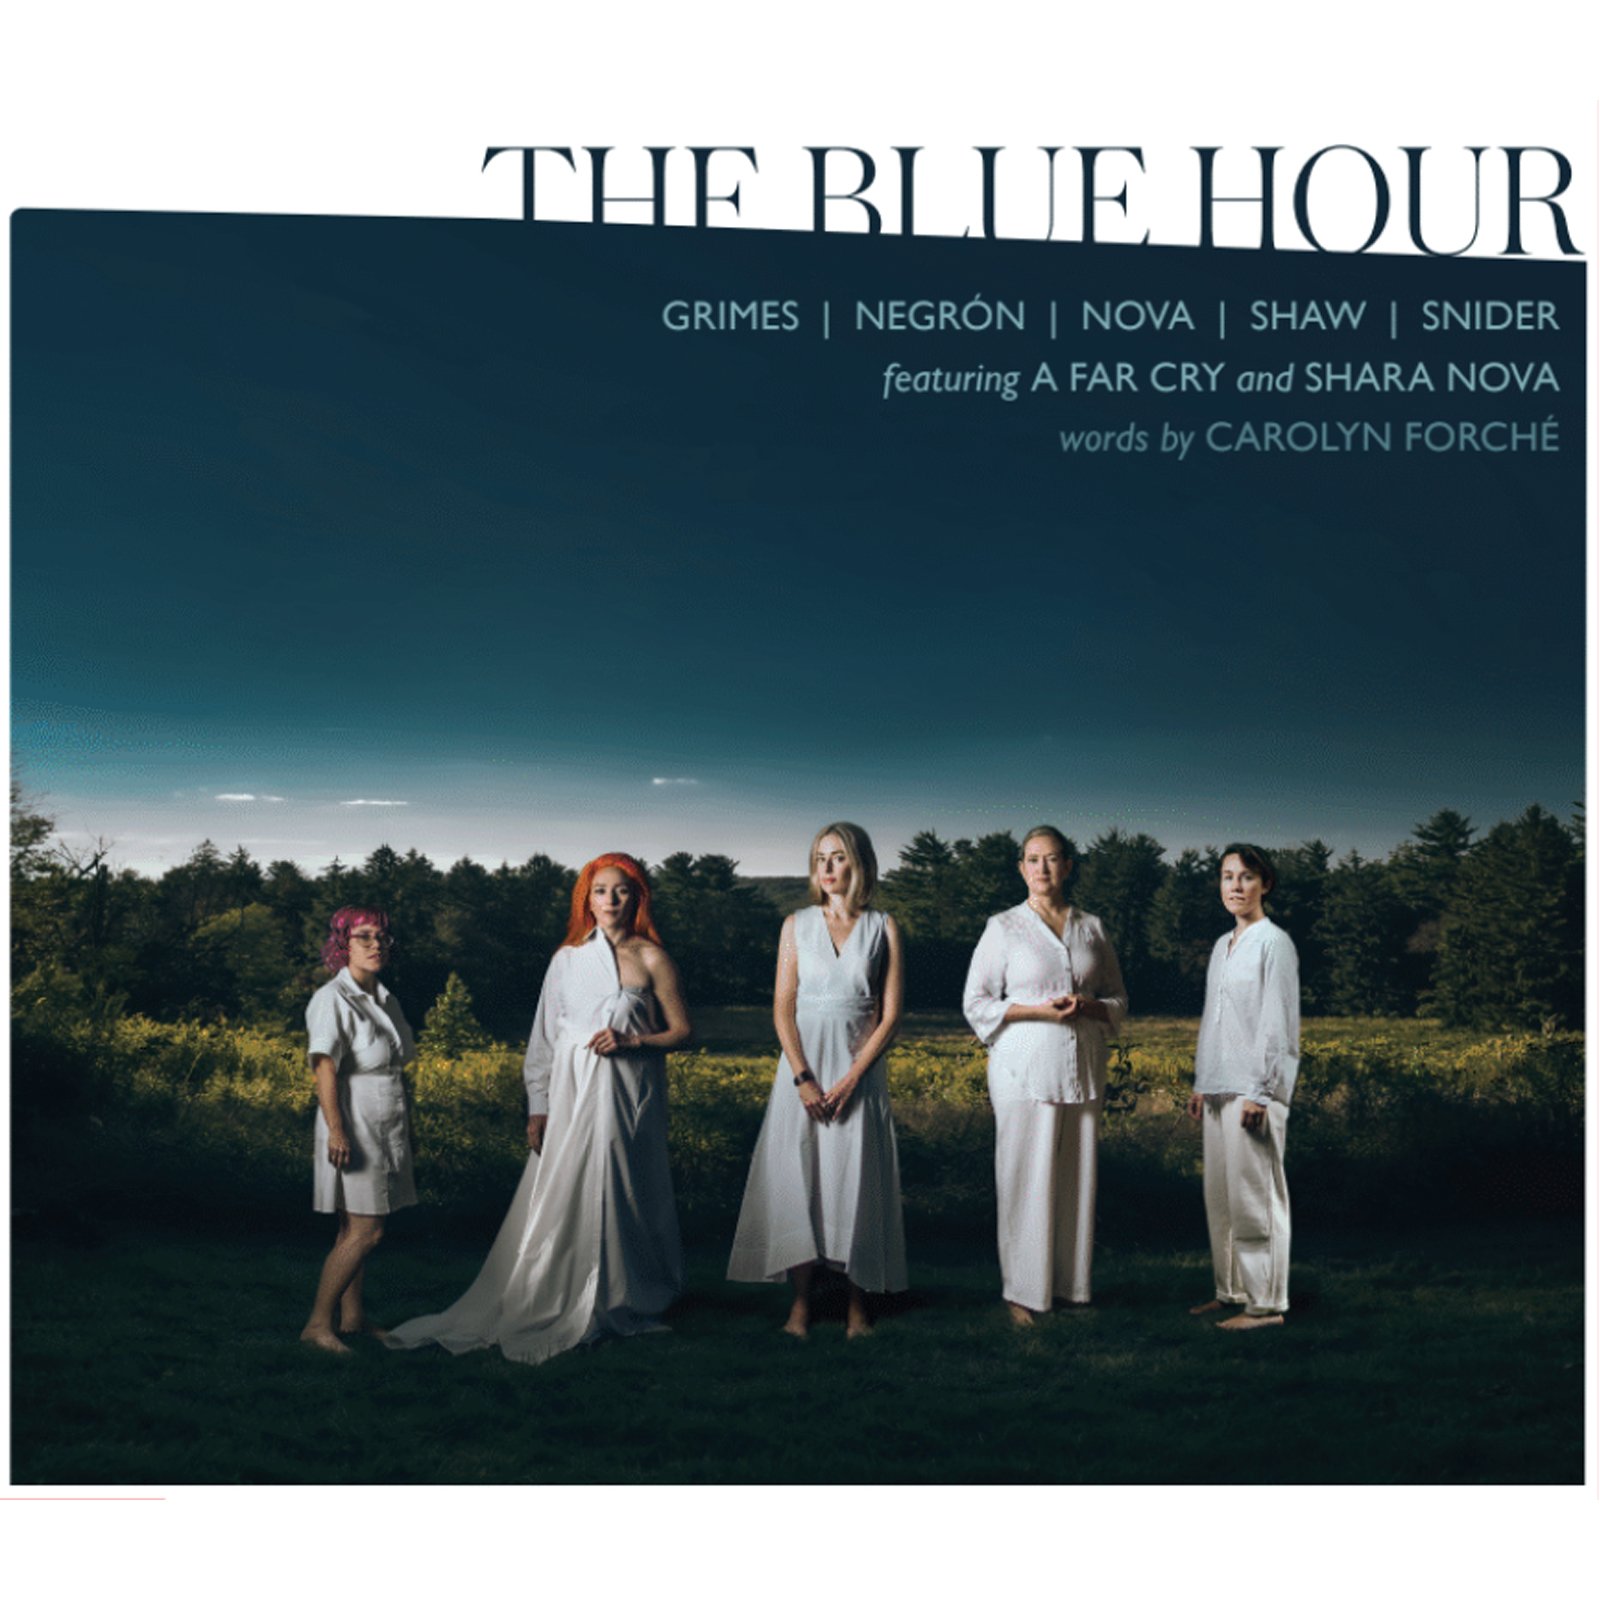 The+Blue+Hour+Front+Cover.jpg